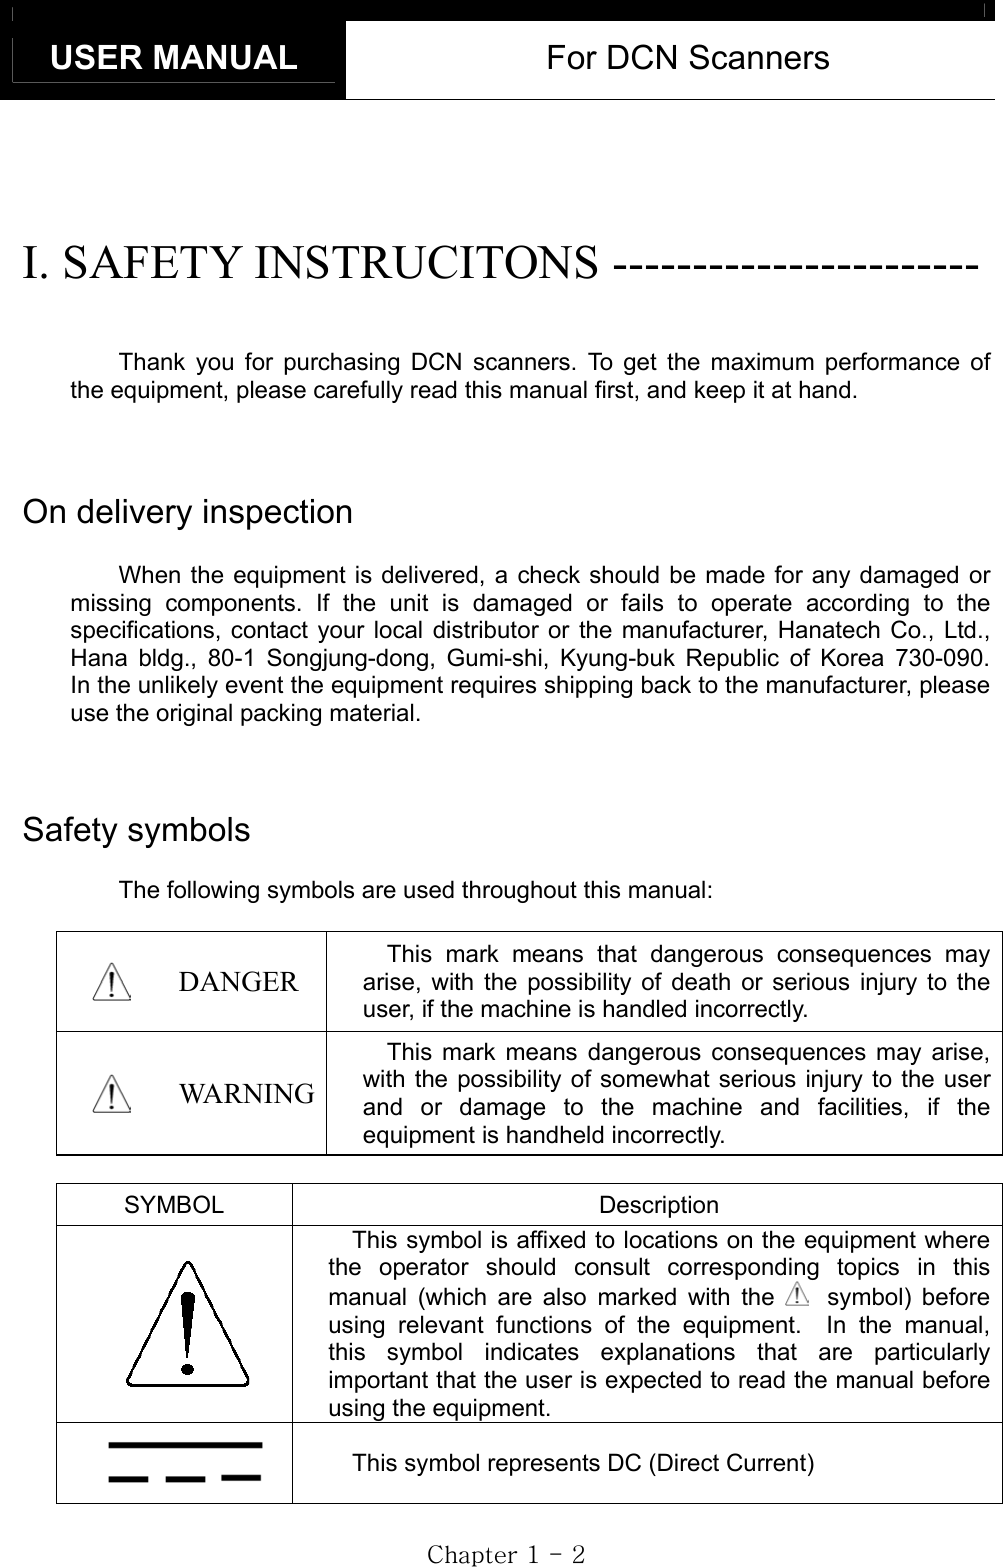 USER MANUAL  For DCN Scanners GjGXGTGYGI. SAFETY INSTRUCITONS ----------------------- Thank you for purchasing DCN scanners. To get the maximum performance of the equipment, please carefully read this manual first, and keep it at hand. On delivery inspection When the equipment is delivered, a check should be made for any damaged or missing components. If the unit is damaged or fails to operate according to the specifications, contact your local distributor or the manufacturer, Hanatech Co., Ltd., Hana bldg., 80-1 Songjung-dong, Gumi-shi, Kyung-buk Republic of Korea 730-090.  In the unlikely event the equipment requires shipping back to the manufacturer, please use the original packing material. Safety symbols The following symbols are used throughout this manual: DANGER This mark means that dangerous consequences may arise, with the possibility of death or serious injury to the user, if the machine is handled incorrectly. WARNING This mark means dangerous consequences may arise, with the possibility of somewhat serious injury to the user and or damage to the machine and facilities, if the equipment is handheld incorrectly. SYMBOL Description This symbol is affixed to locations on the equipment where the operator should consult corresponding topics in this manual (which are also marked with the symbol) before using relevant functions of the equipment.  In the manual, this symbol indicates explanations that are particularly important that the user is expected to read the manual before using the equipment. This symbol represents DC (Direct Current) 